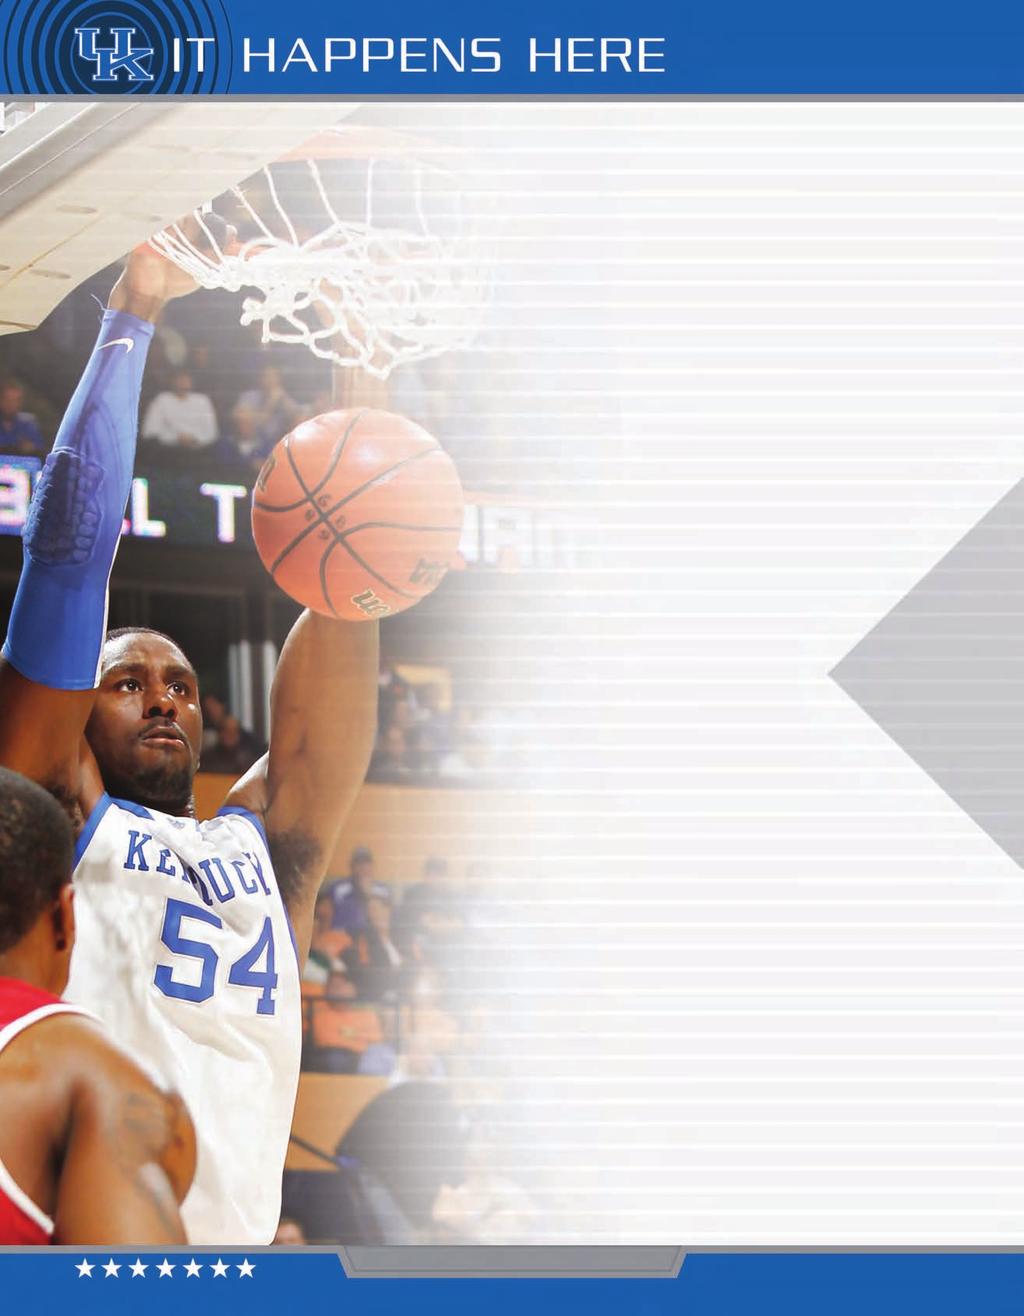 2010 SEC TOURNAMENT HIGHLIGHTS Second-ranked and top-seeded Kentucky powered its way to the 2010 SEC Tournament finals